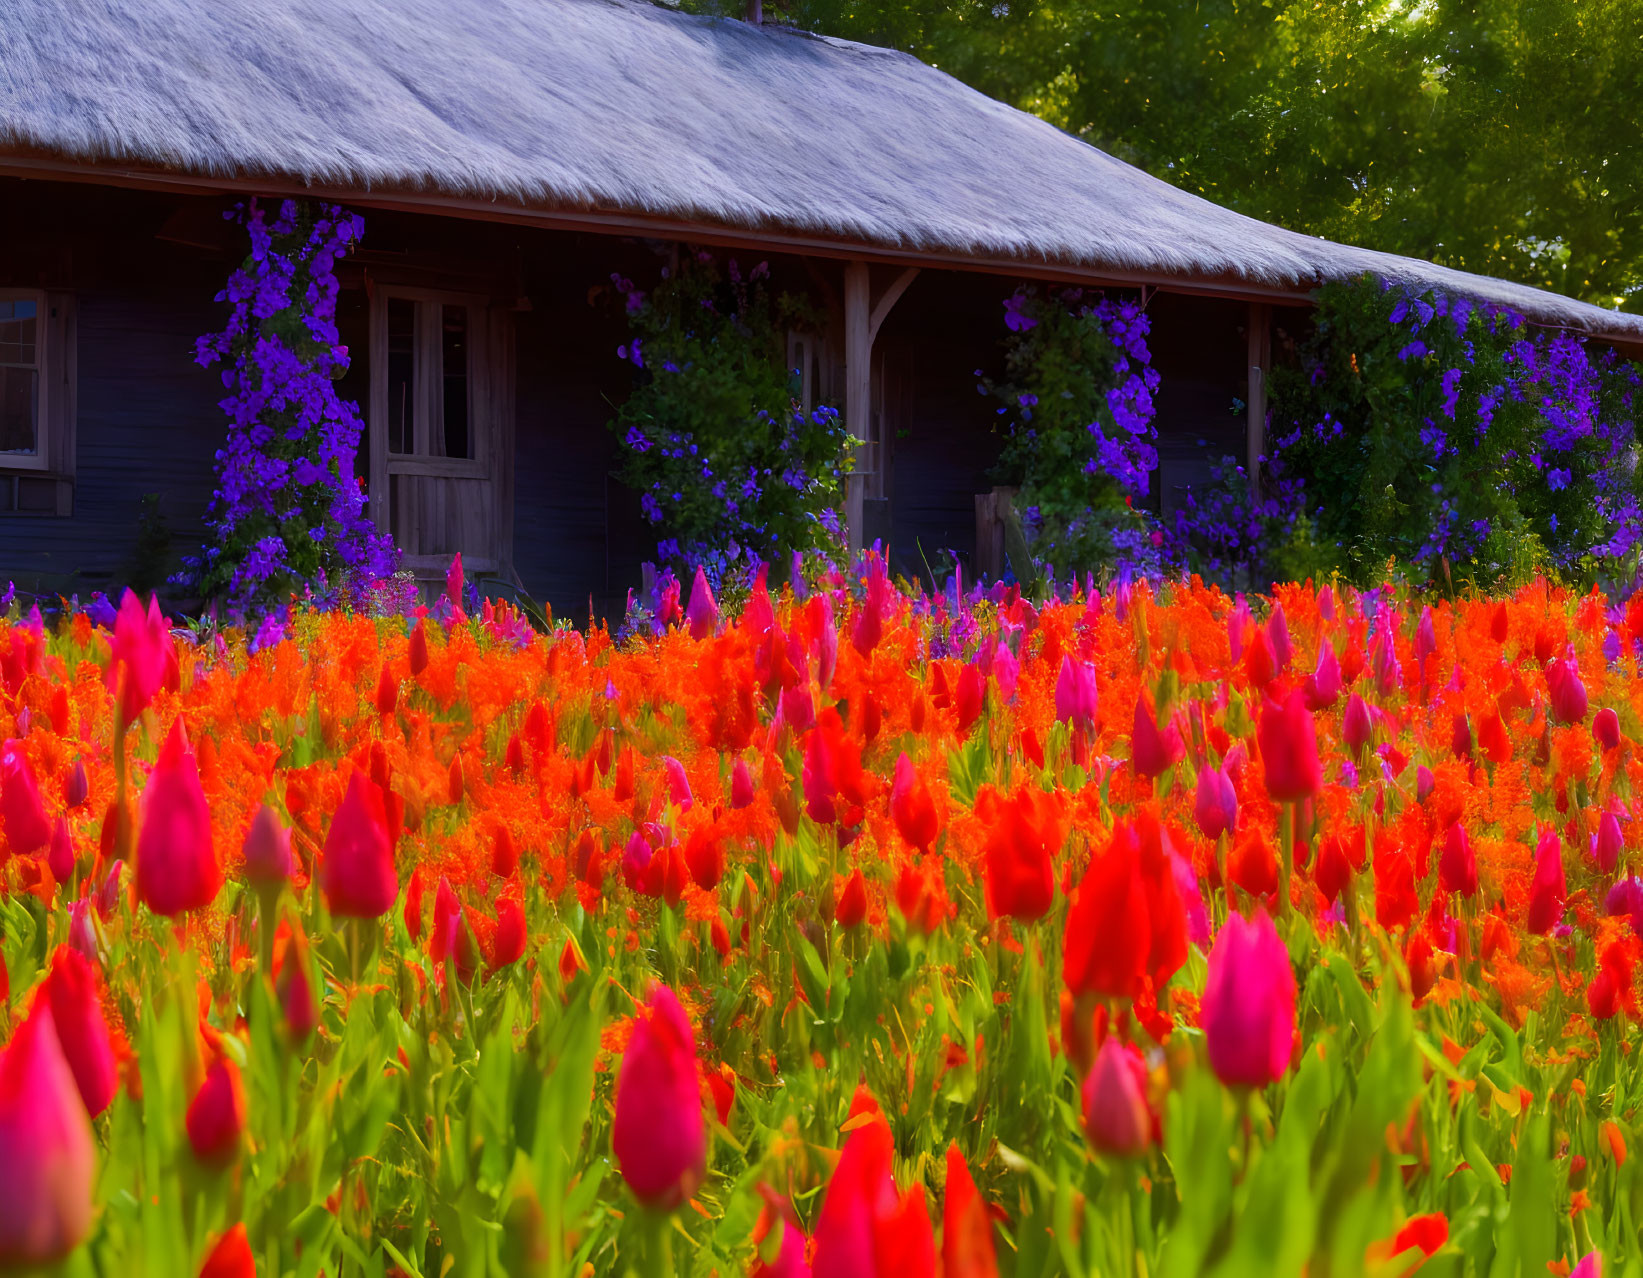 Blooming red tulips and purple flowers on wooden house with snowy roof